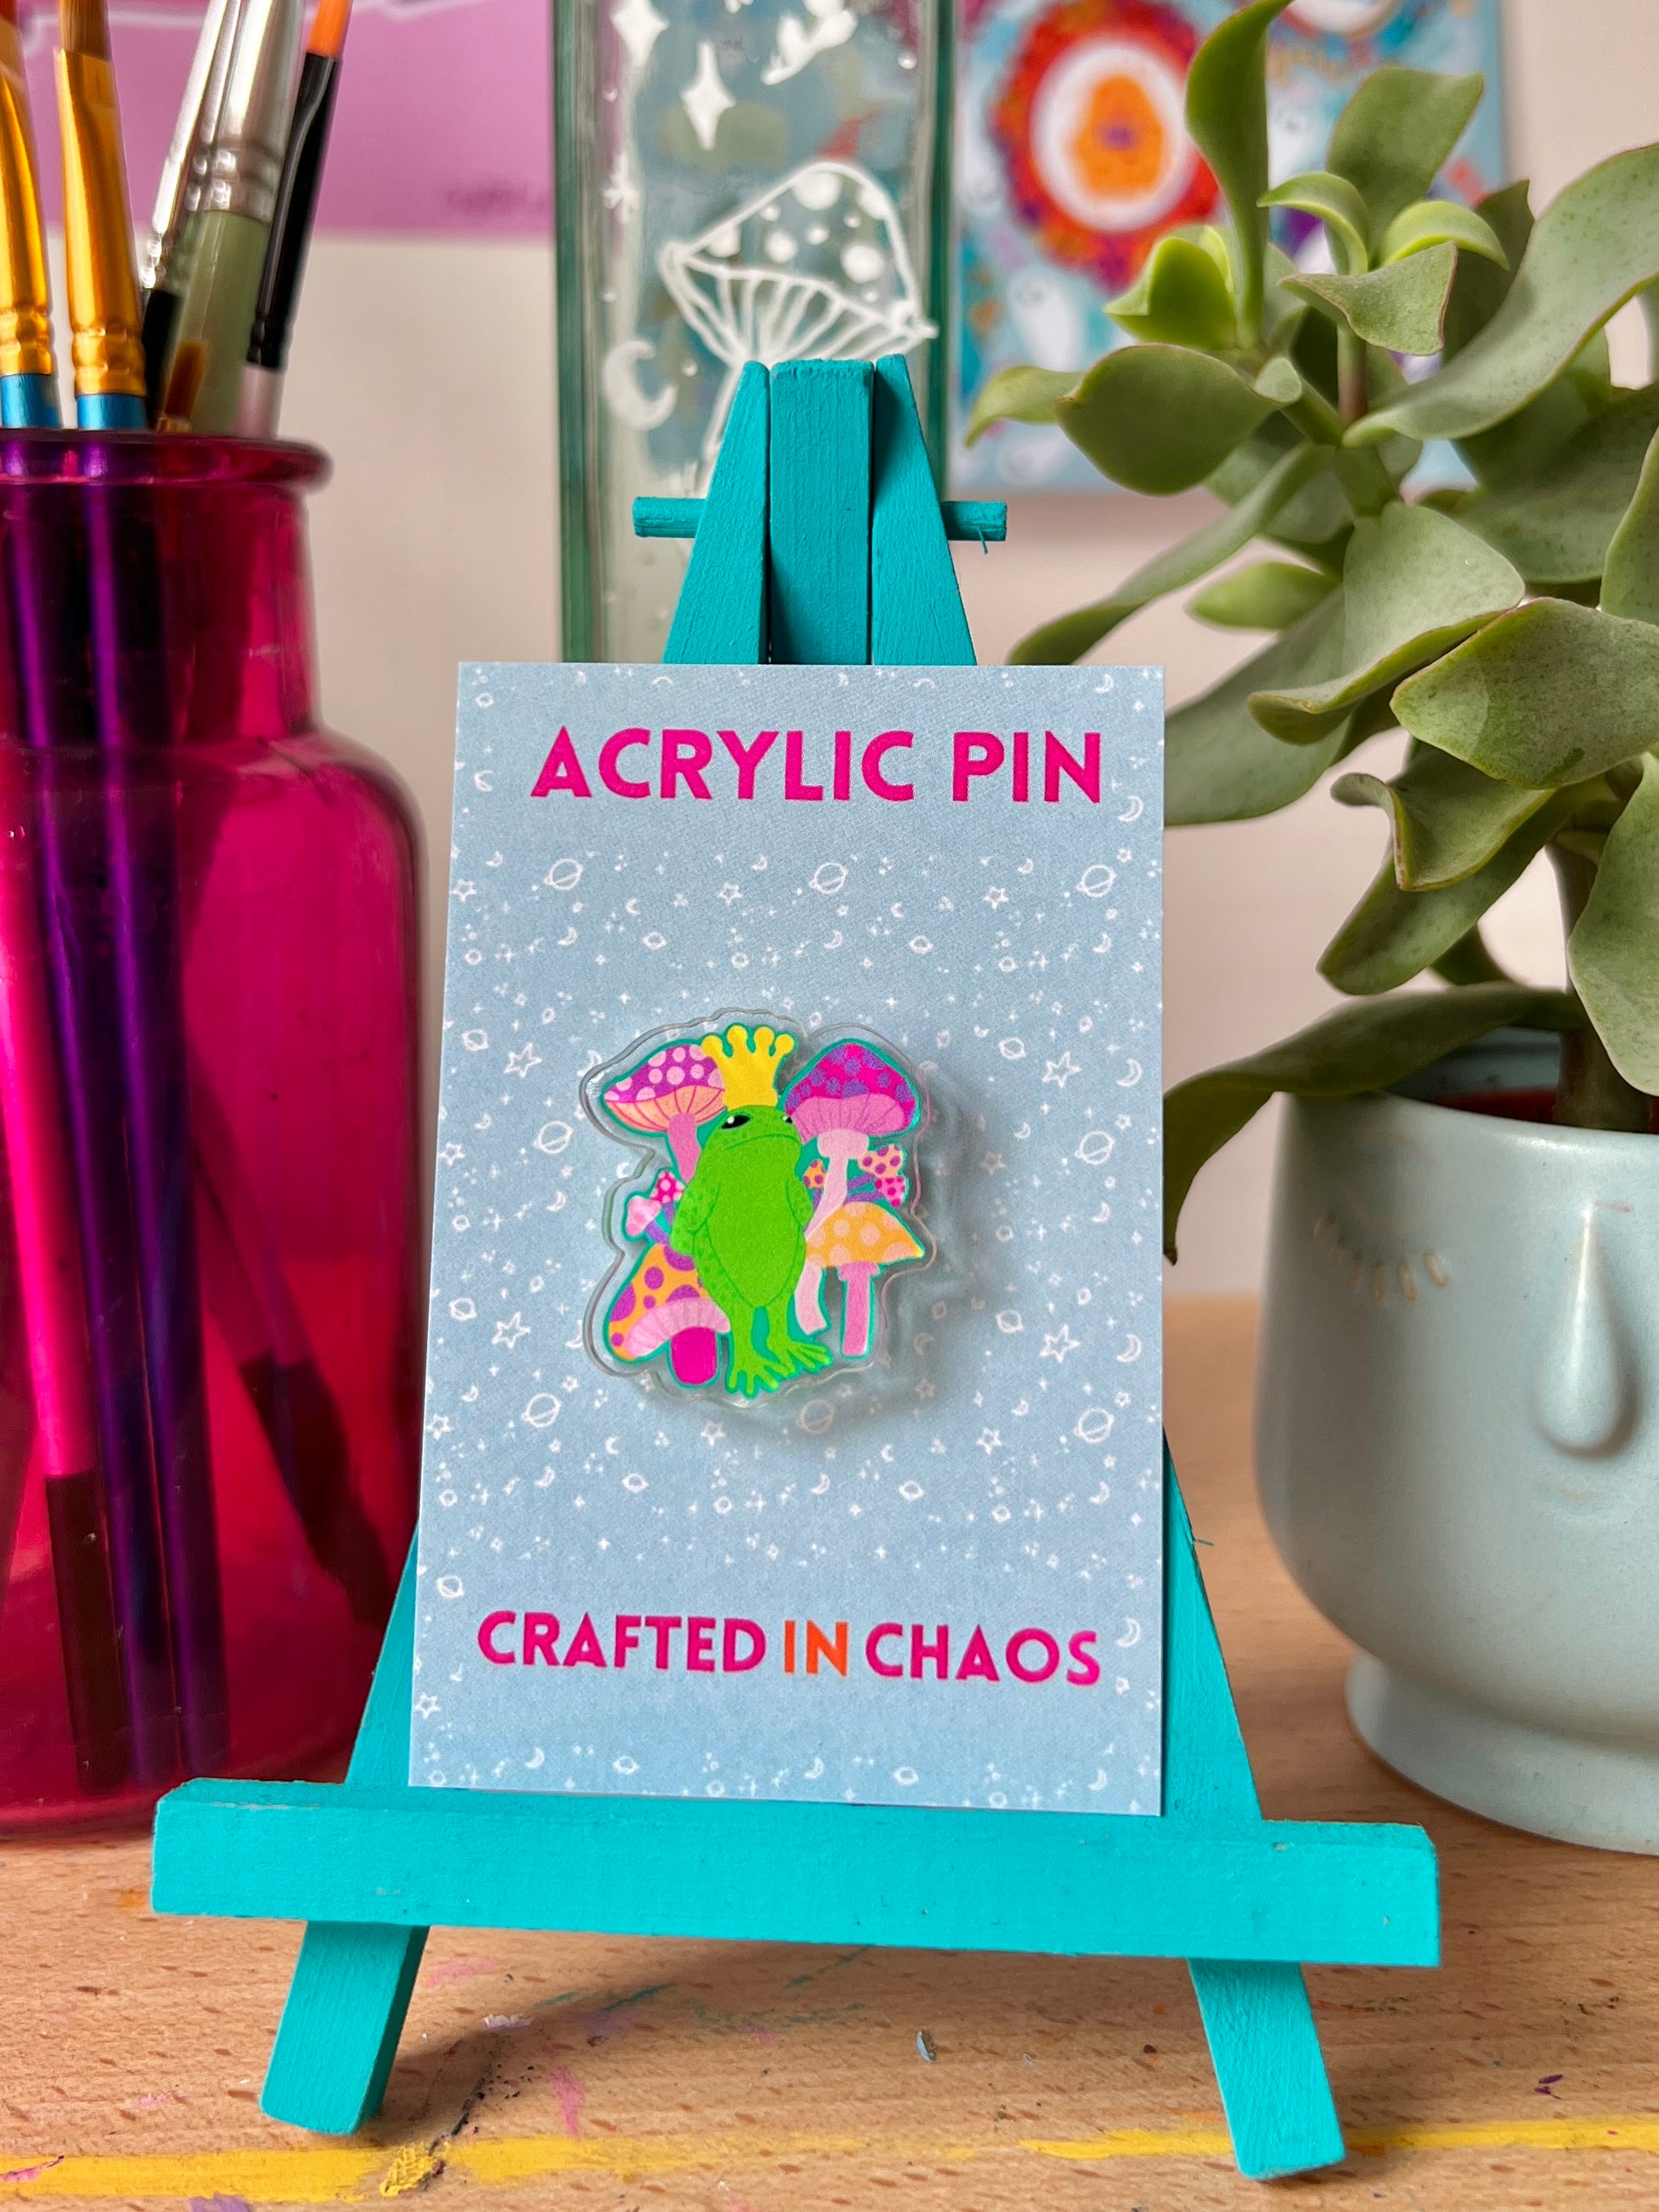 Pin on crafting ideas